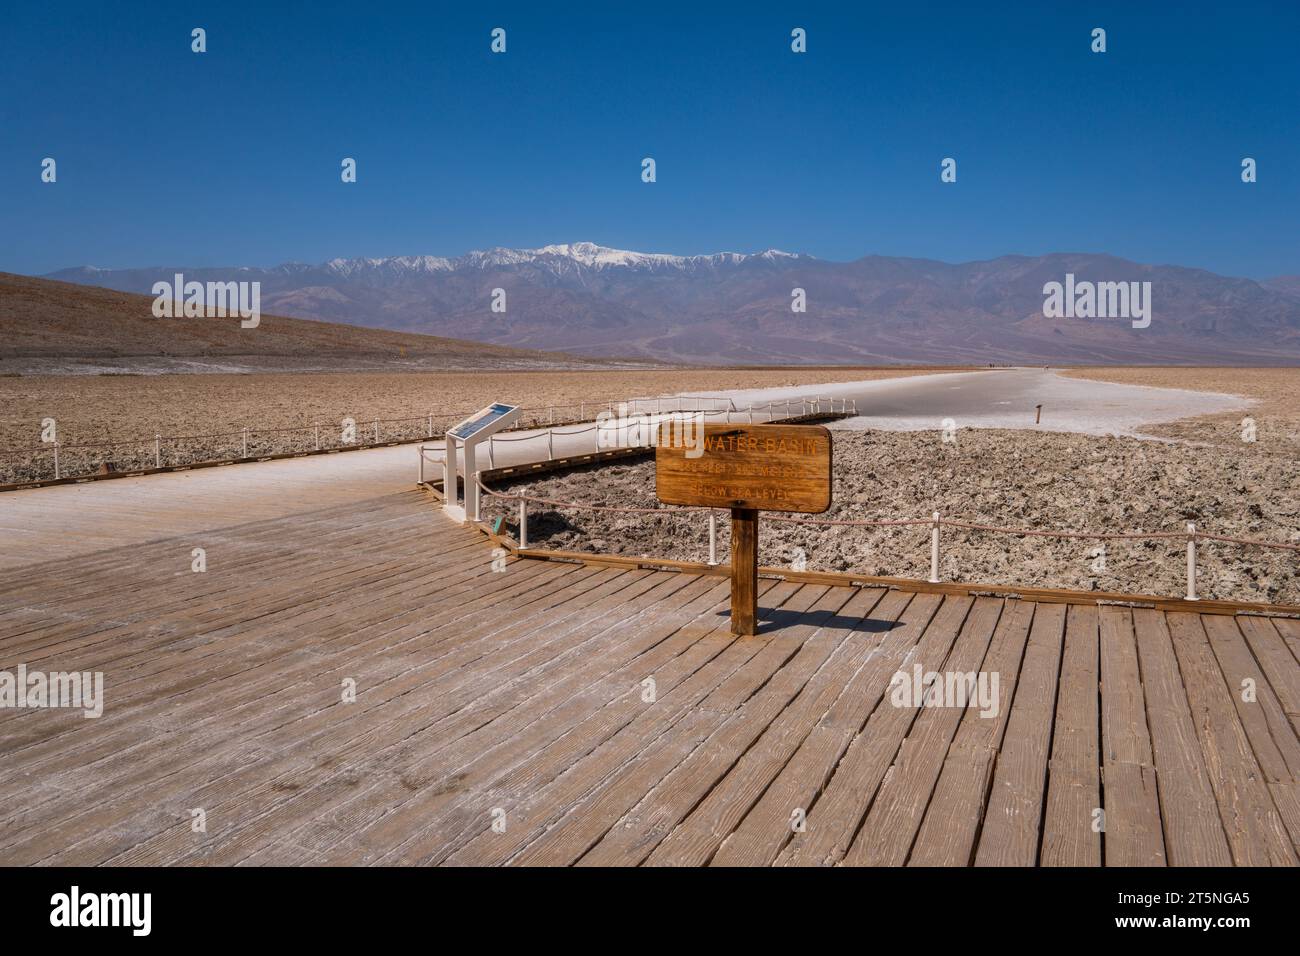 Badwater basin, Death Valley, USA. The sign post of Badwater basin at the lowest point of the USA. Stock Photo